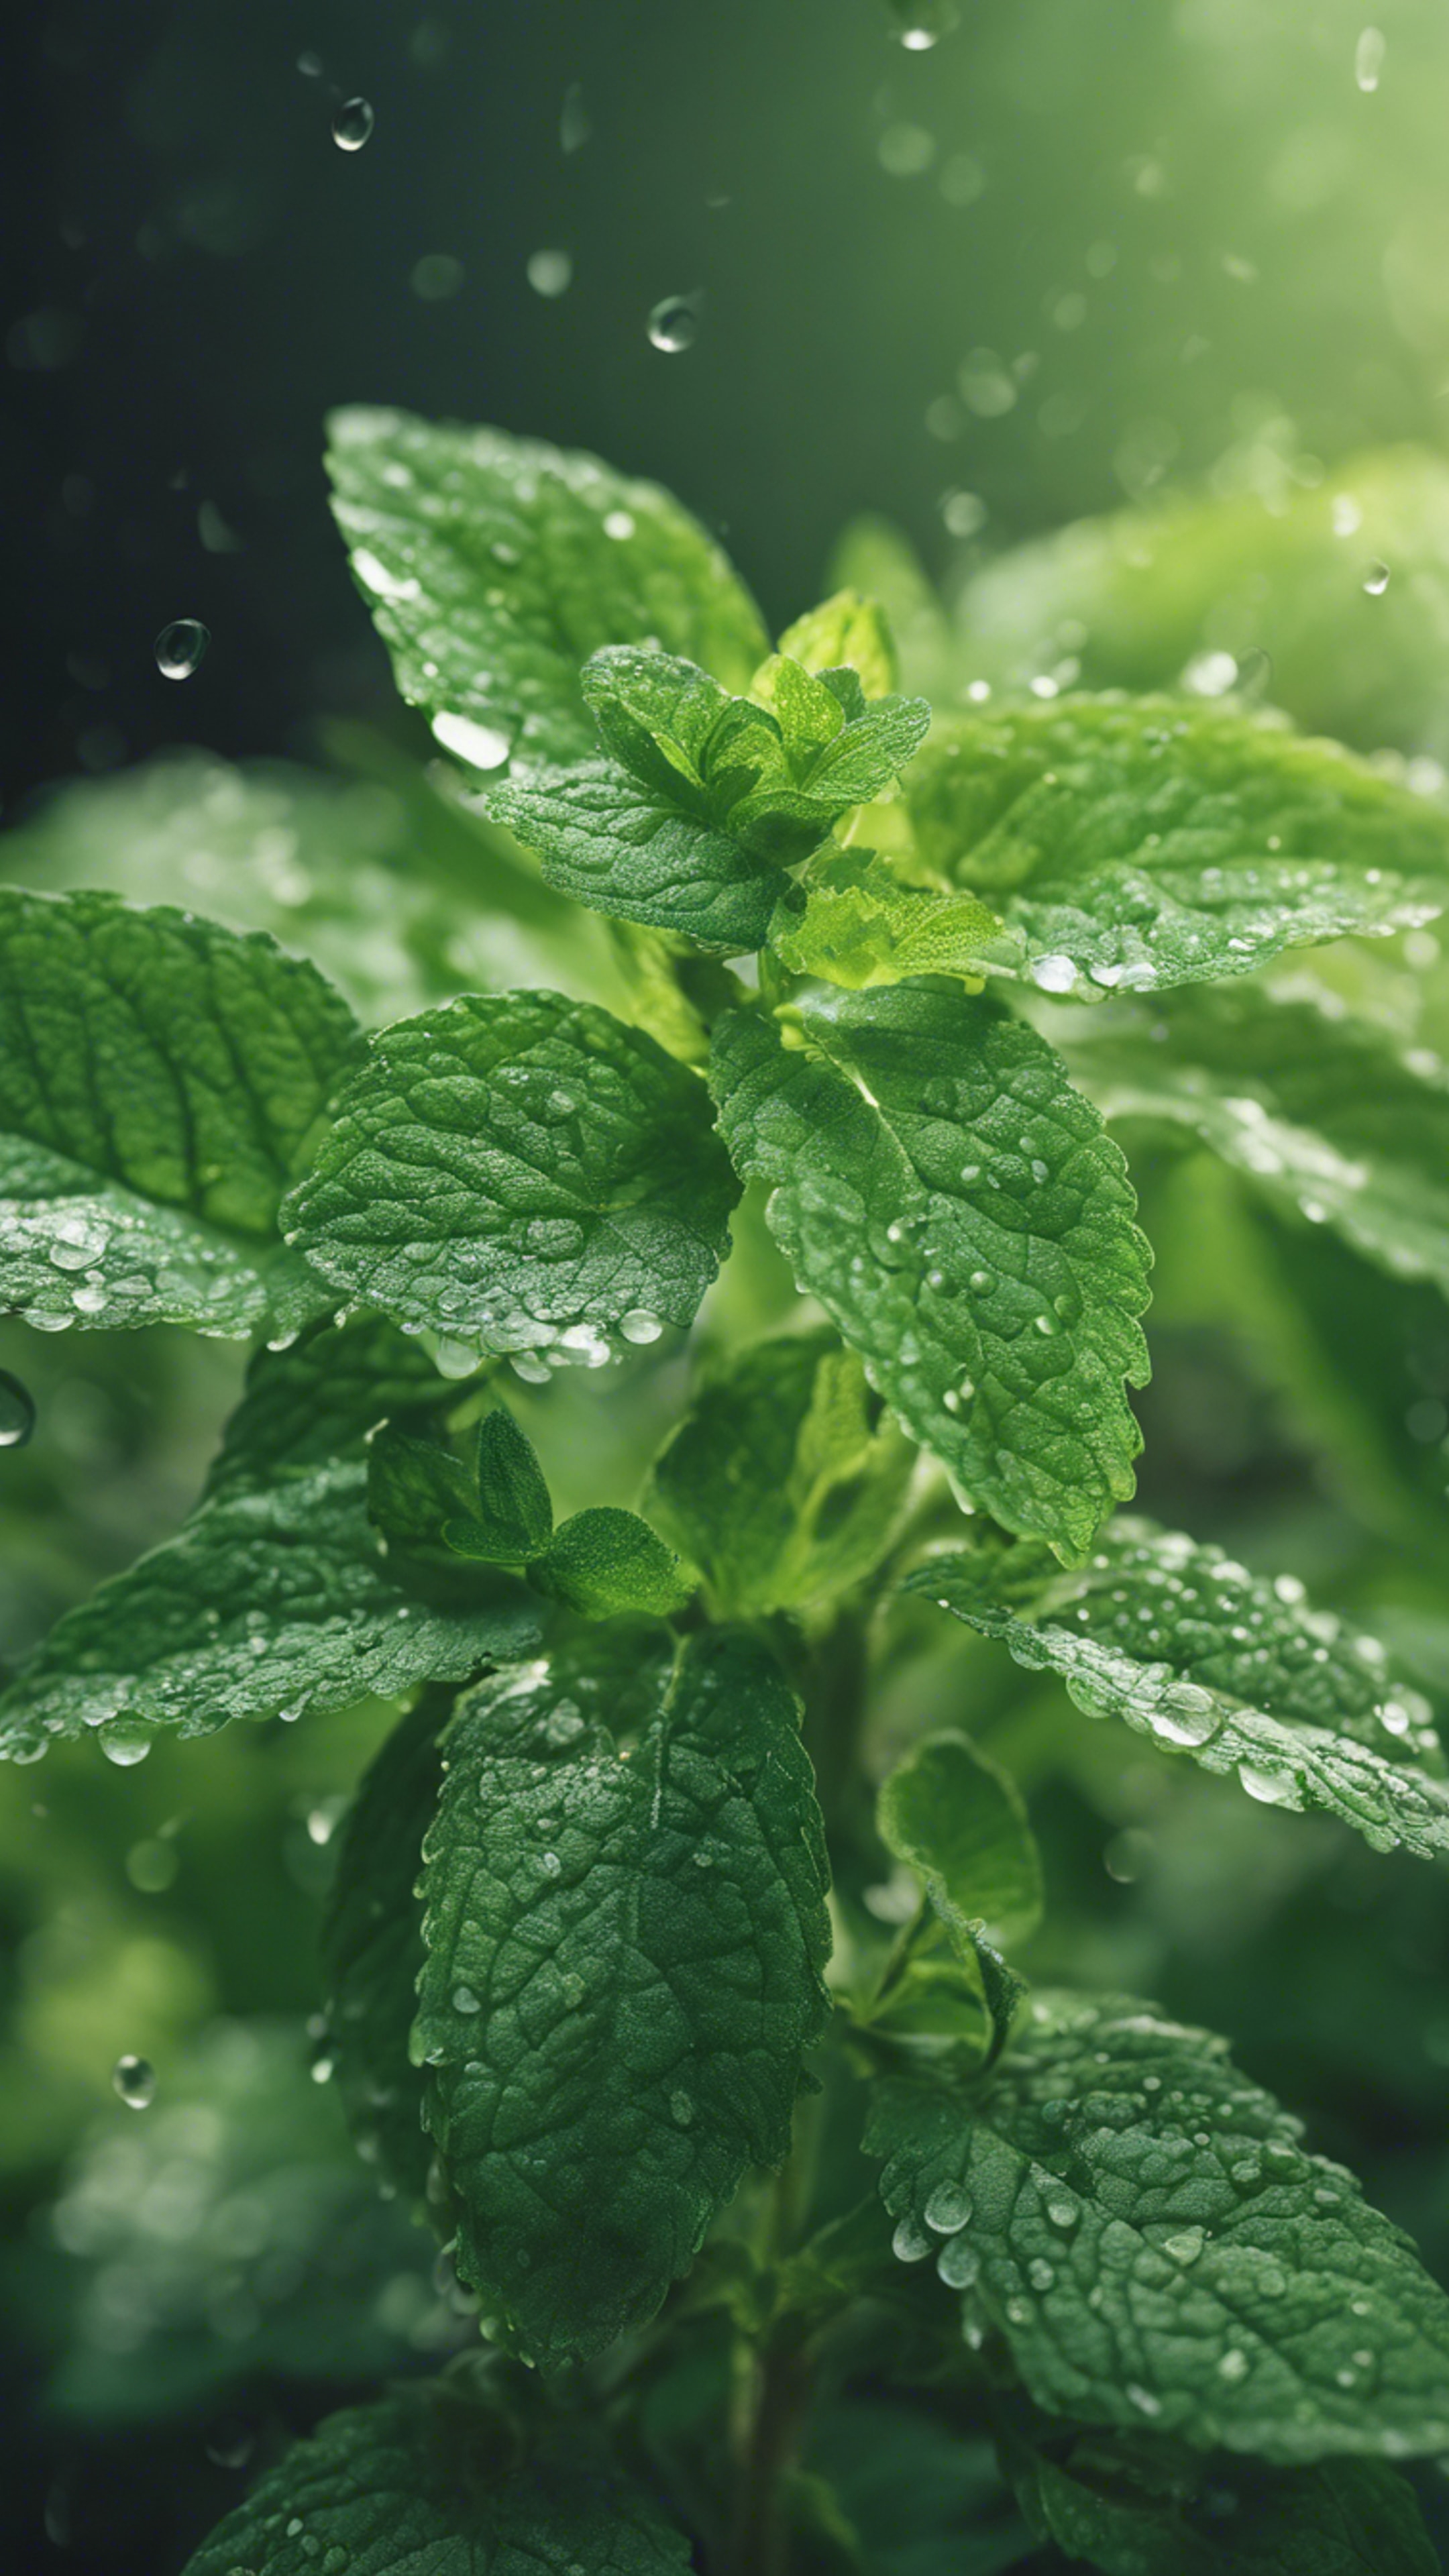 A closeup of a refreshing mint plant with dew drops on its fresh green leaves. 벽지[bde7a5587e54449fbb31]